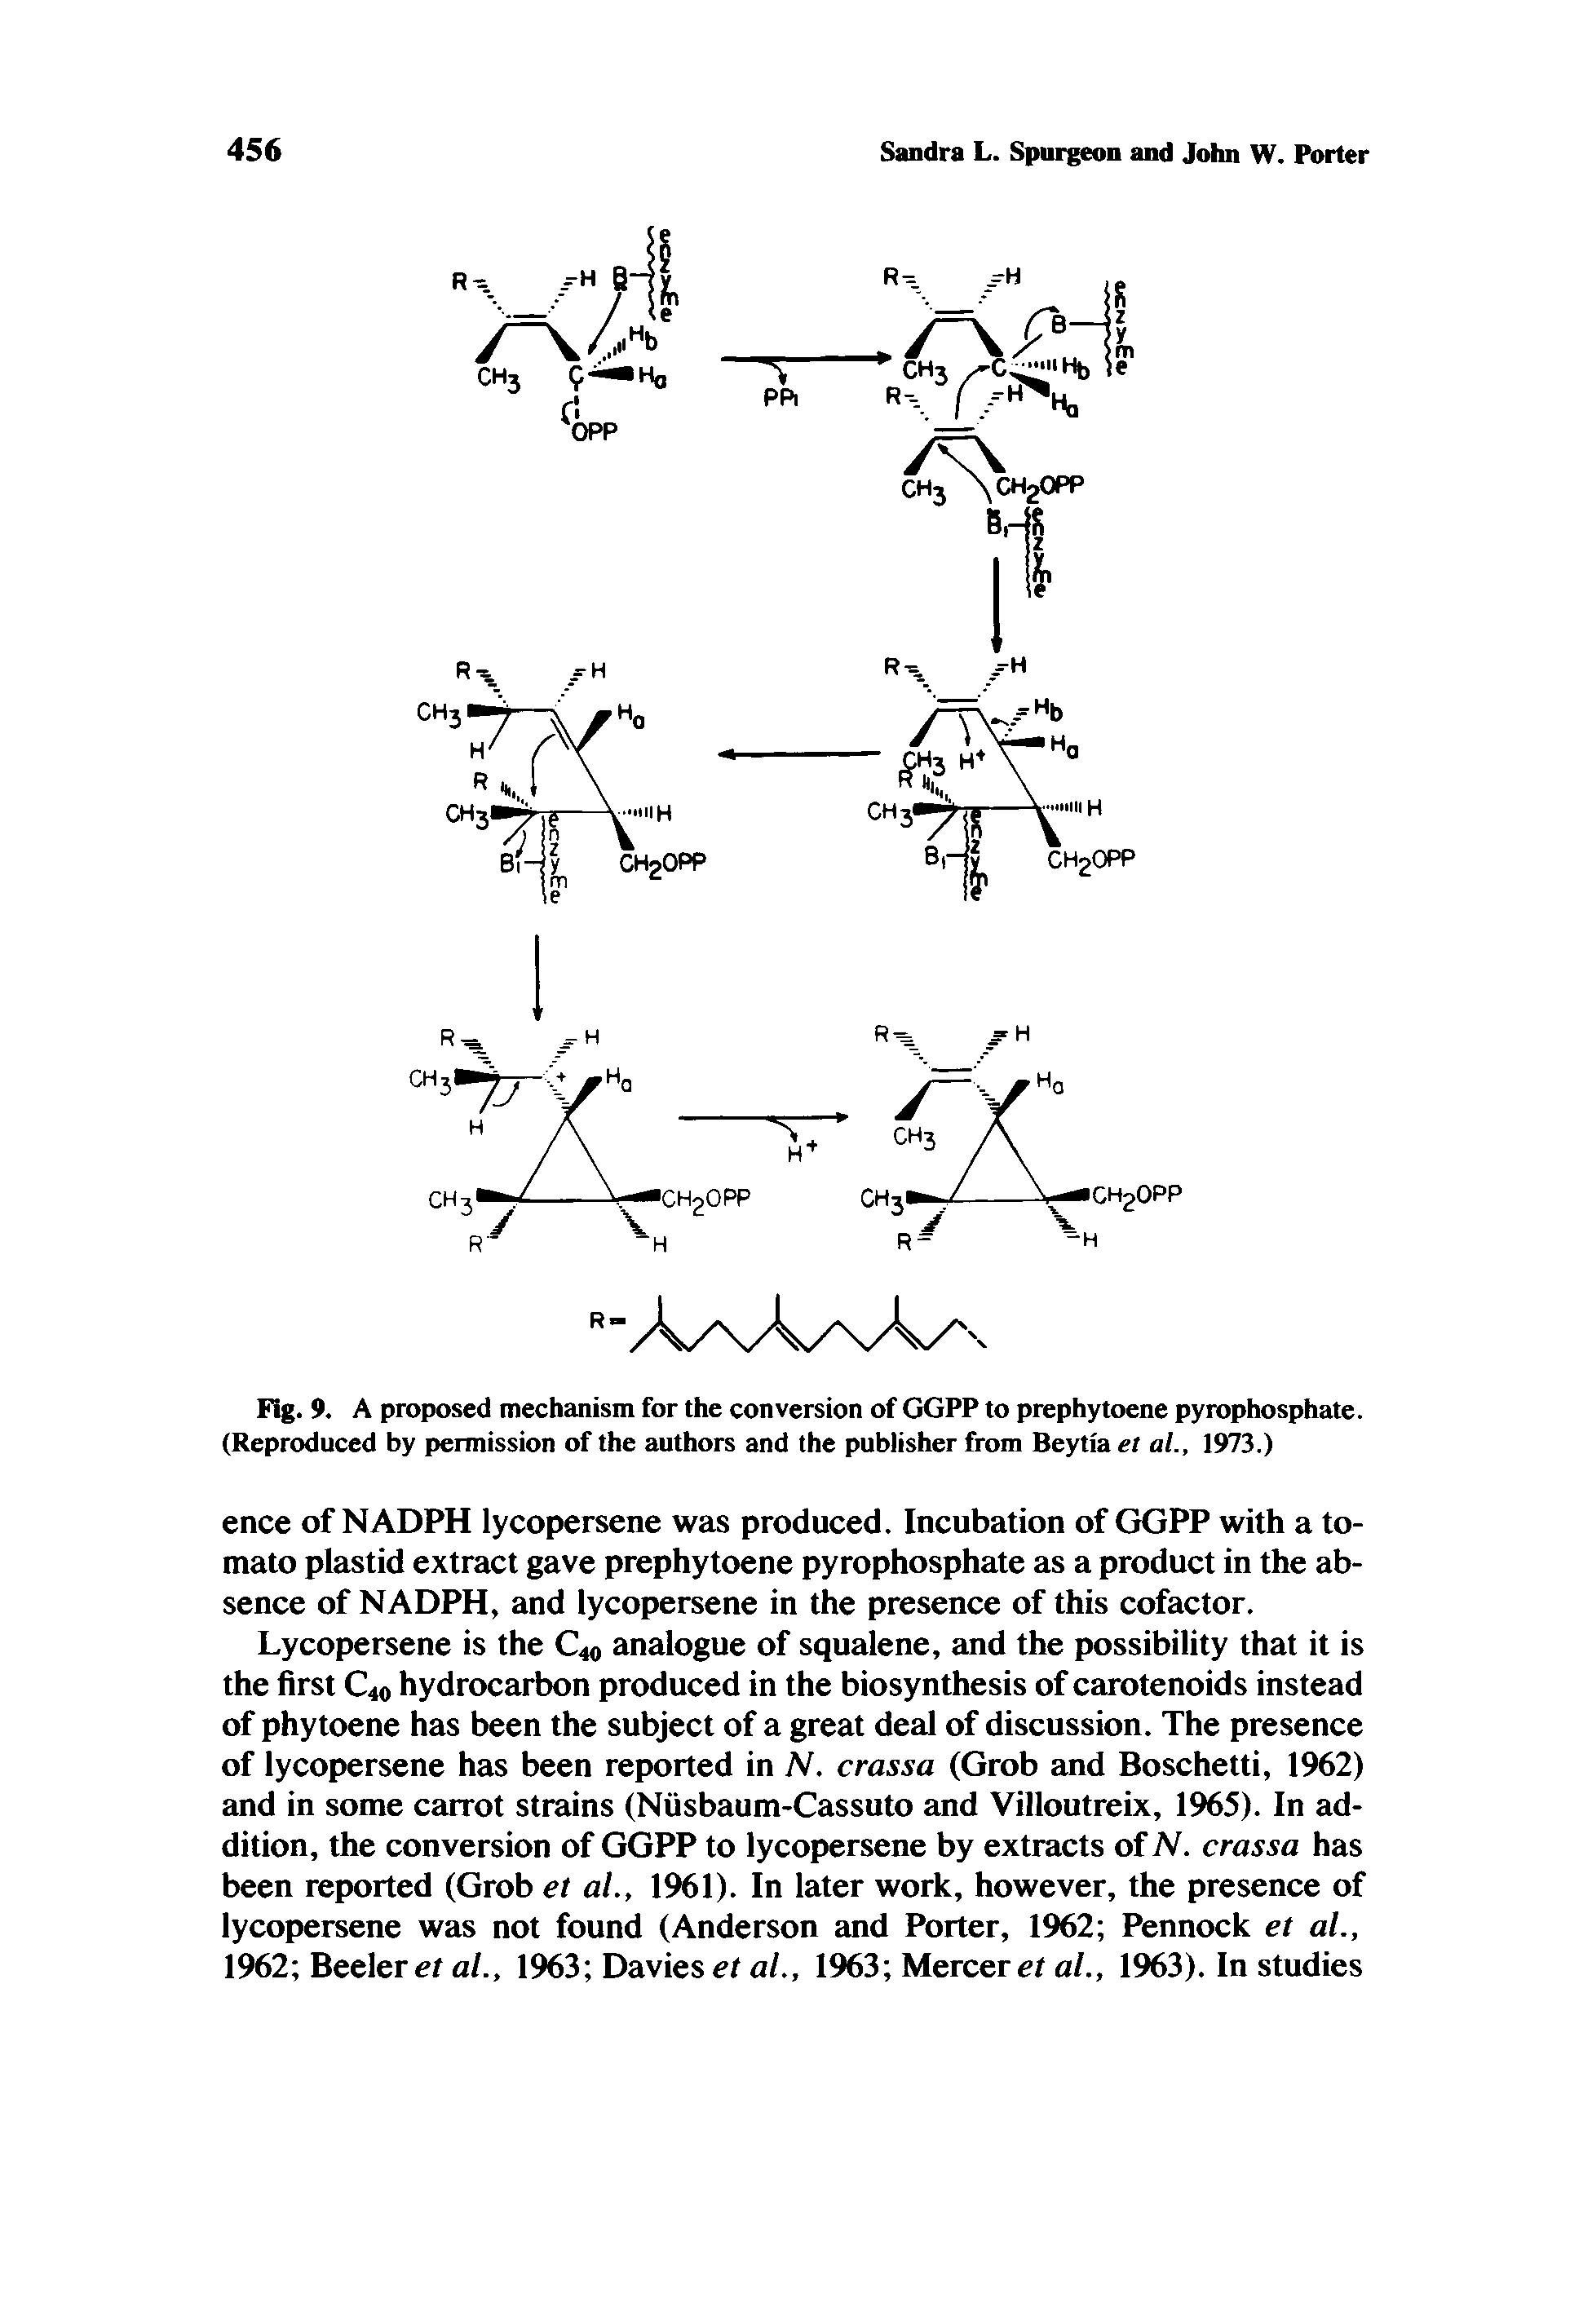 Fig. 9. A proposed mechanism for the conversion of GGPP to prephytoene pyrophosphate. (Reproduced by permission of the authors and the publisher from Beytia el al., 1973.)...